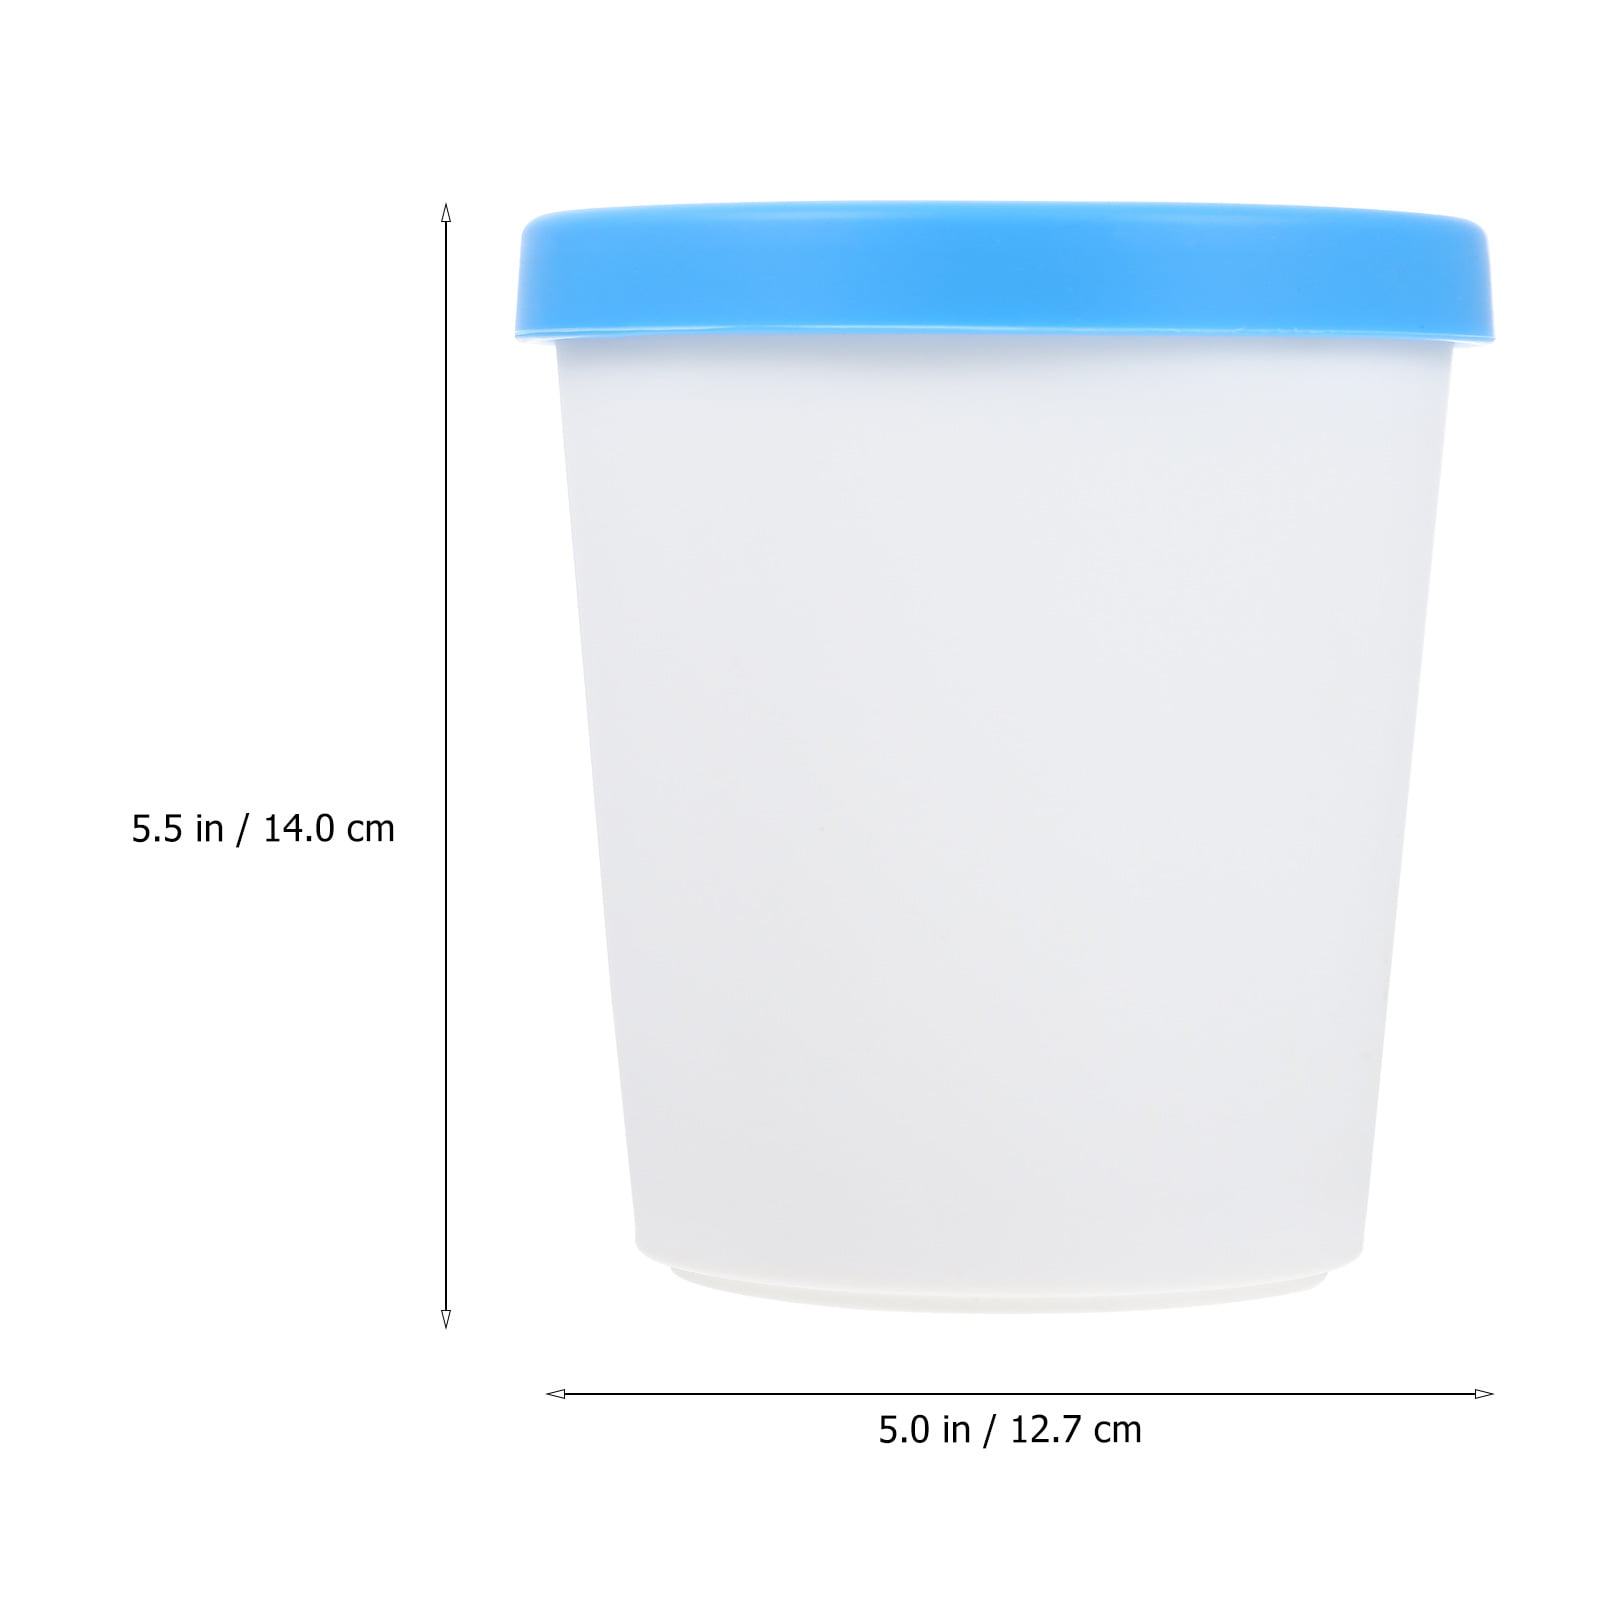 New 1L Capacity Round Ice Cream Containers Cup Reusable Freezer